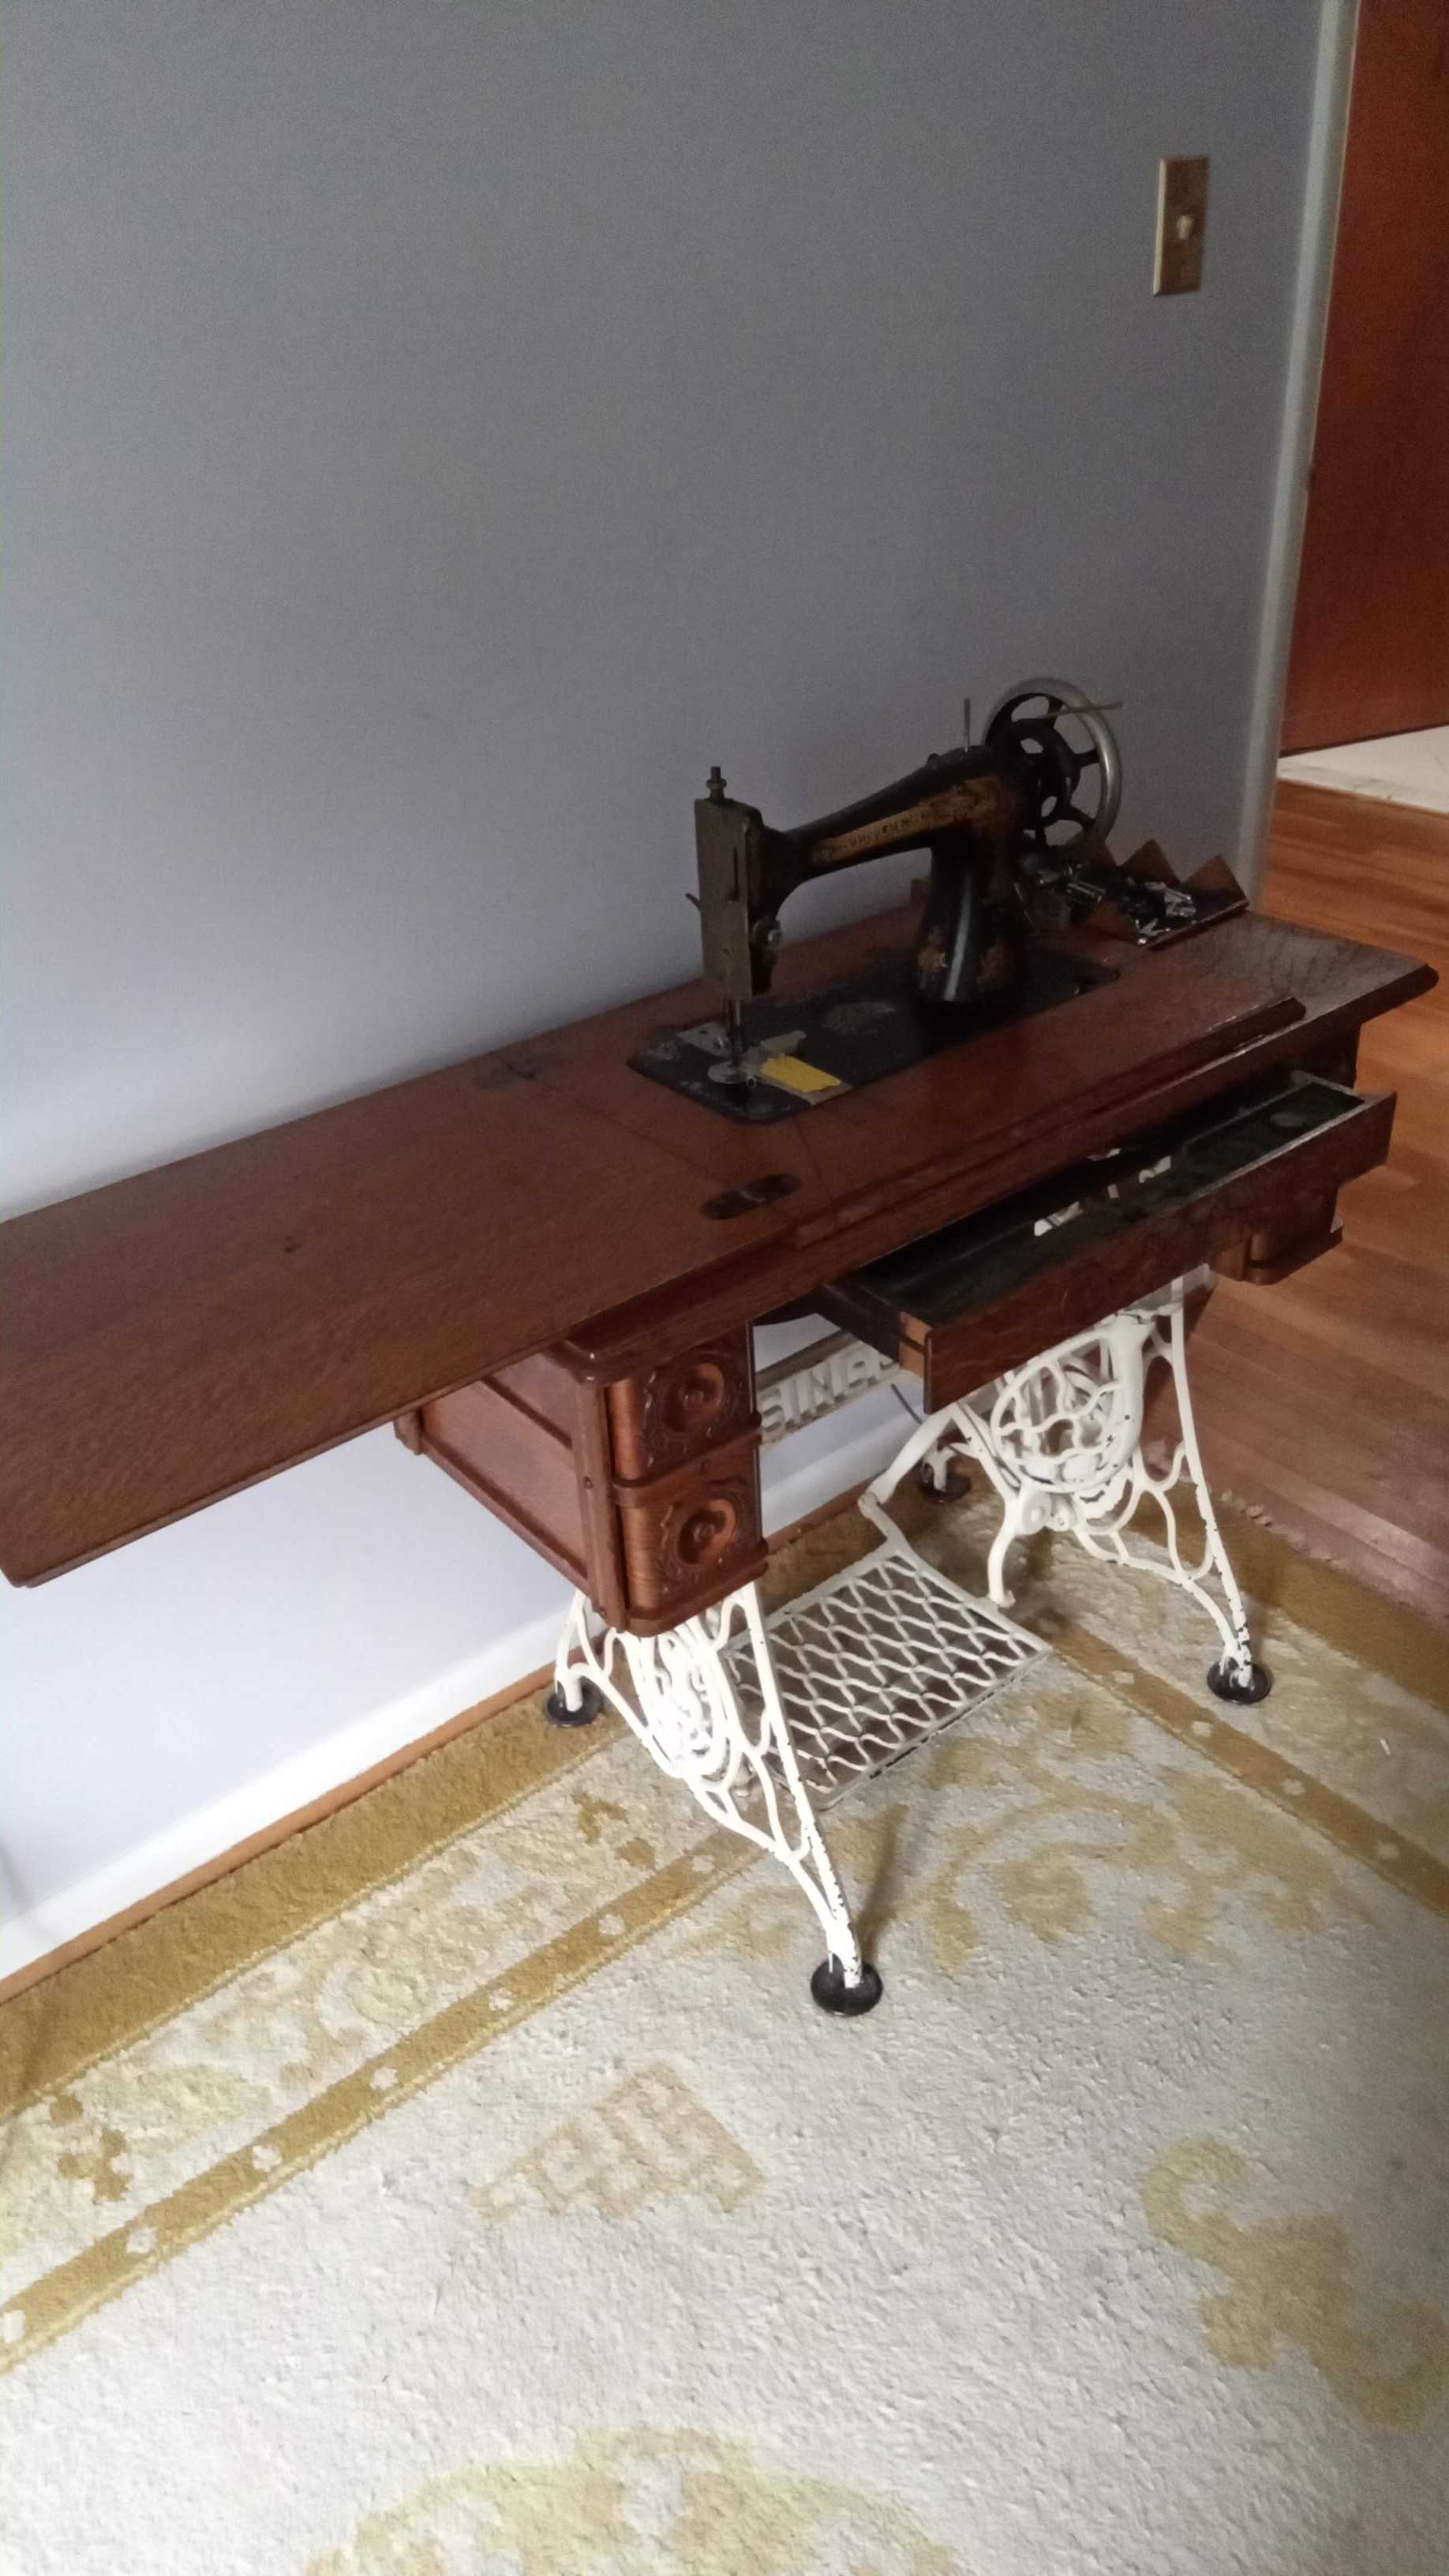 Sold at Auction: Singer Touch & Sew Machine w/ Fruitwood Table